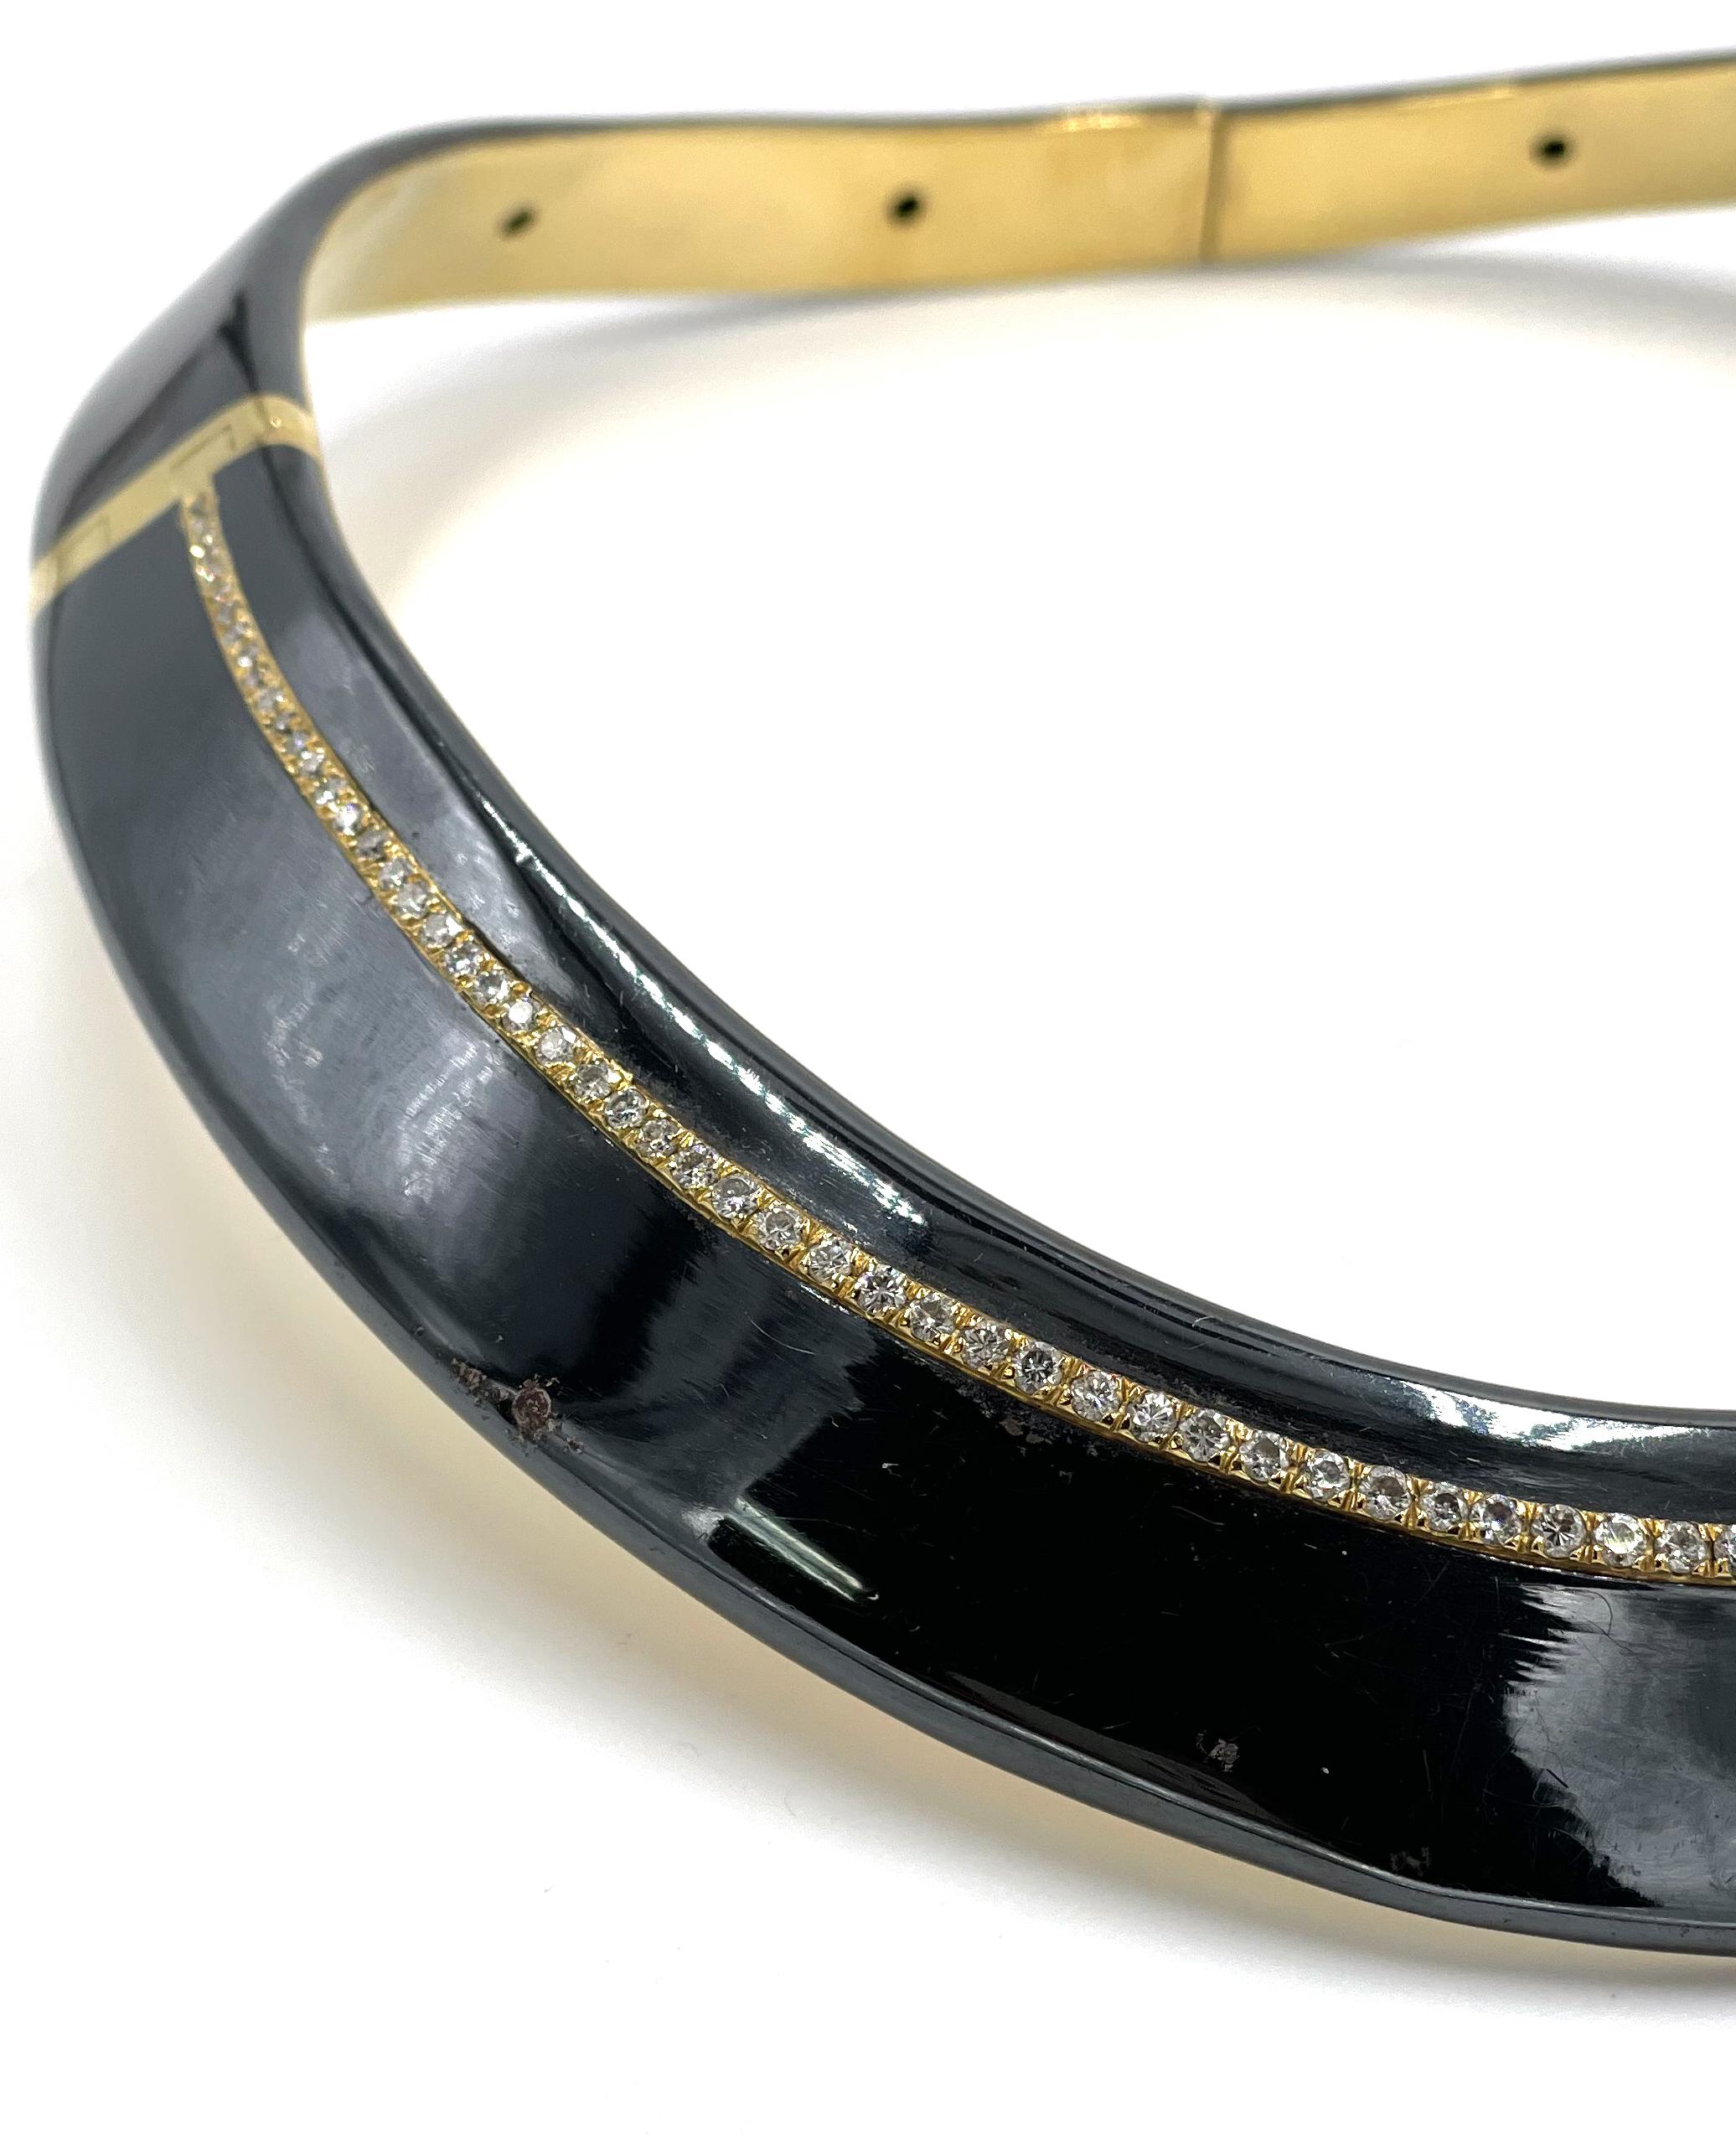 Preowned 18K Yellow Gold Black Enamel and Diamond Collar Necklace In Fair Condition For Sale In Old Tappan, NJ